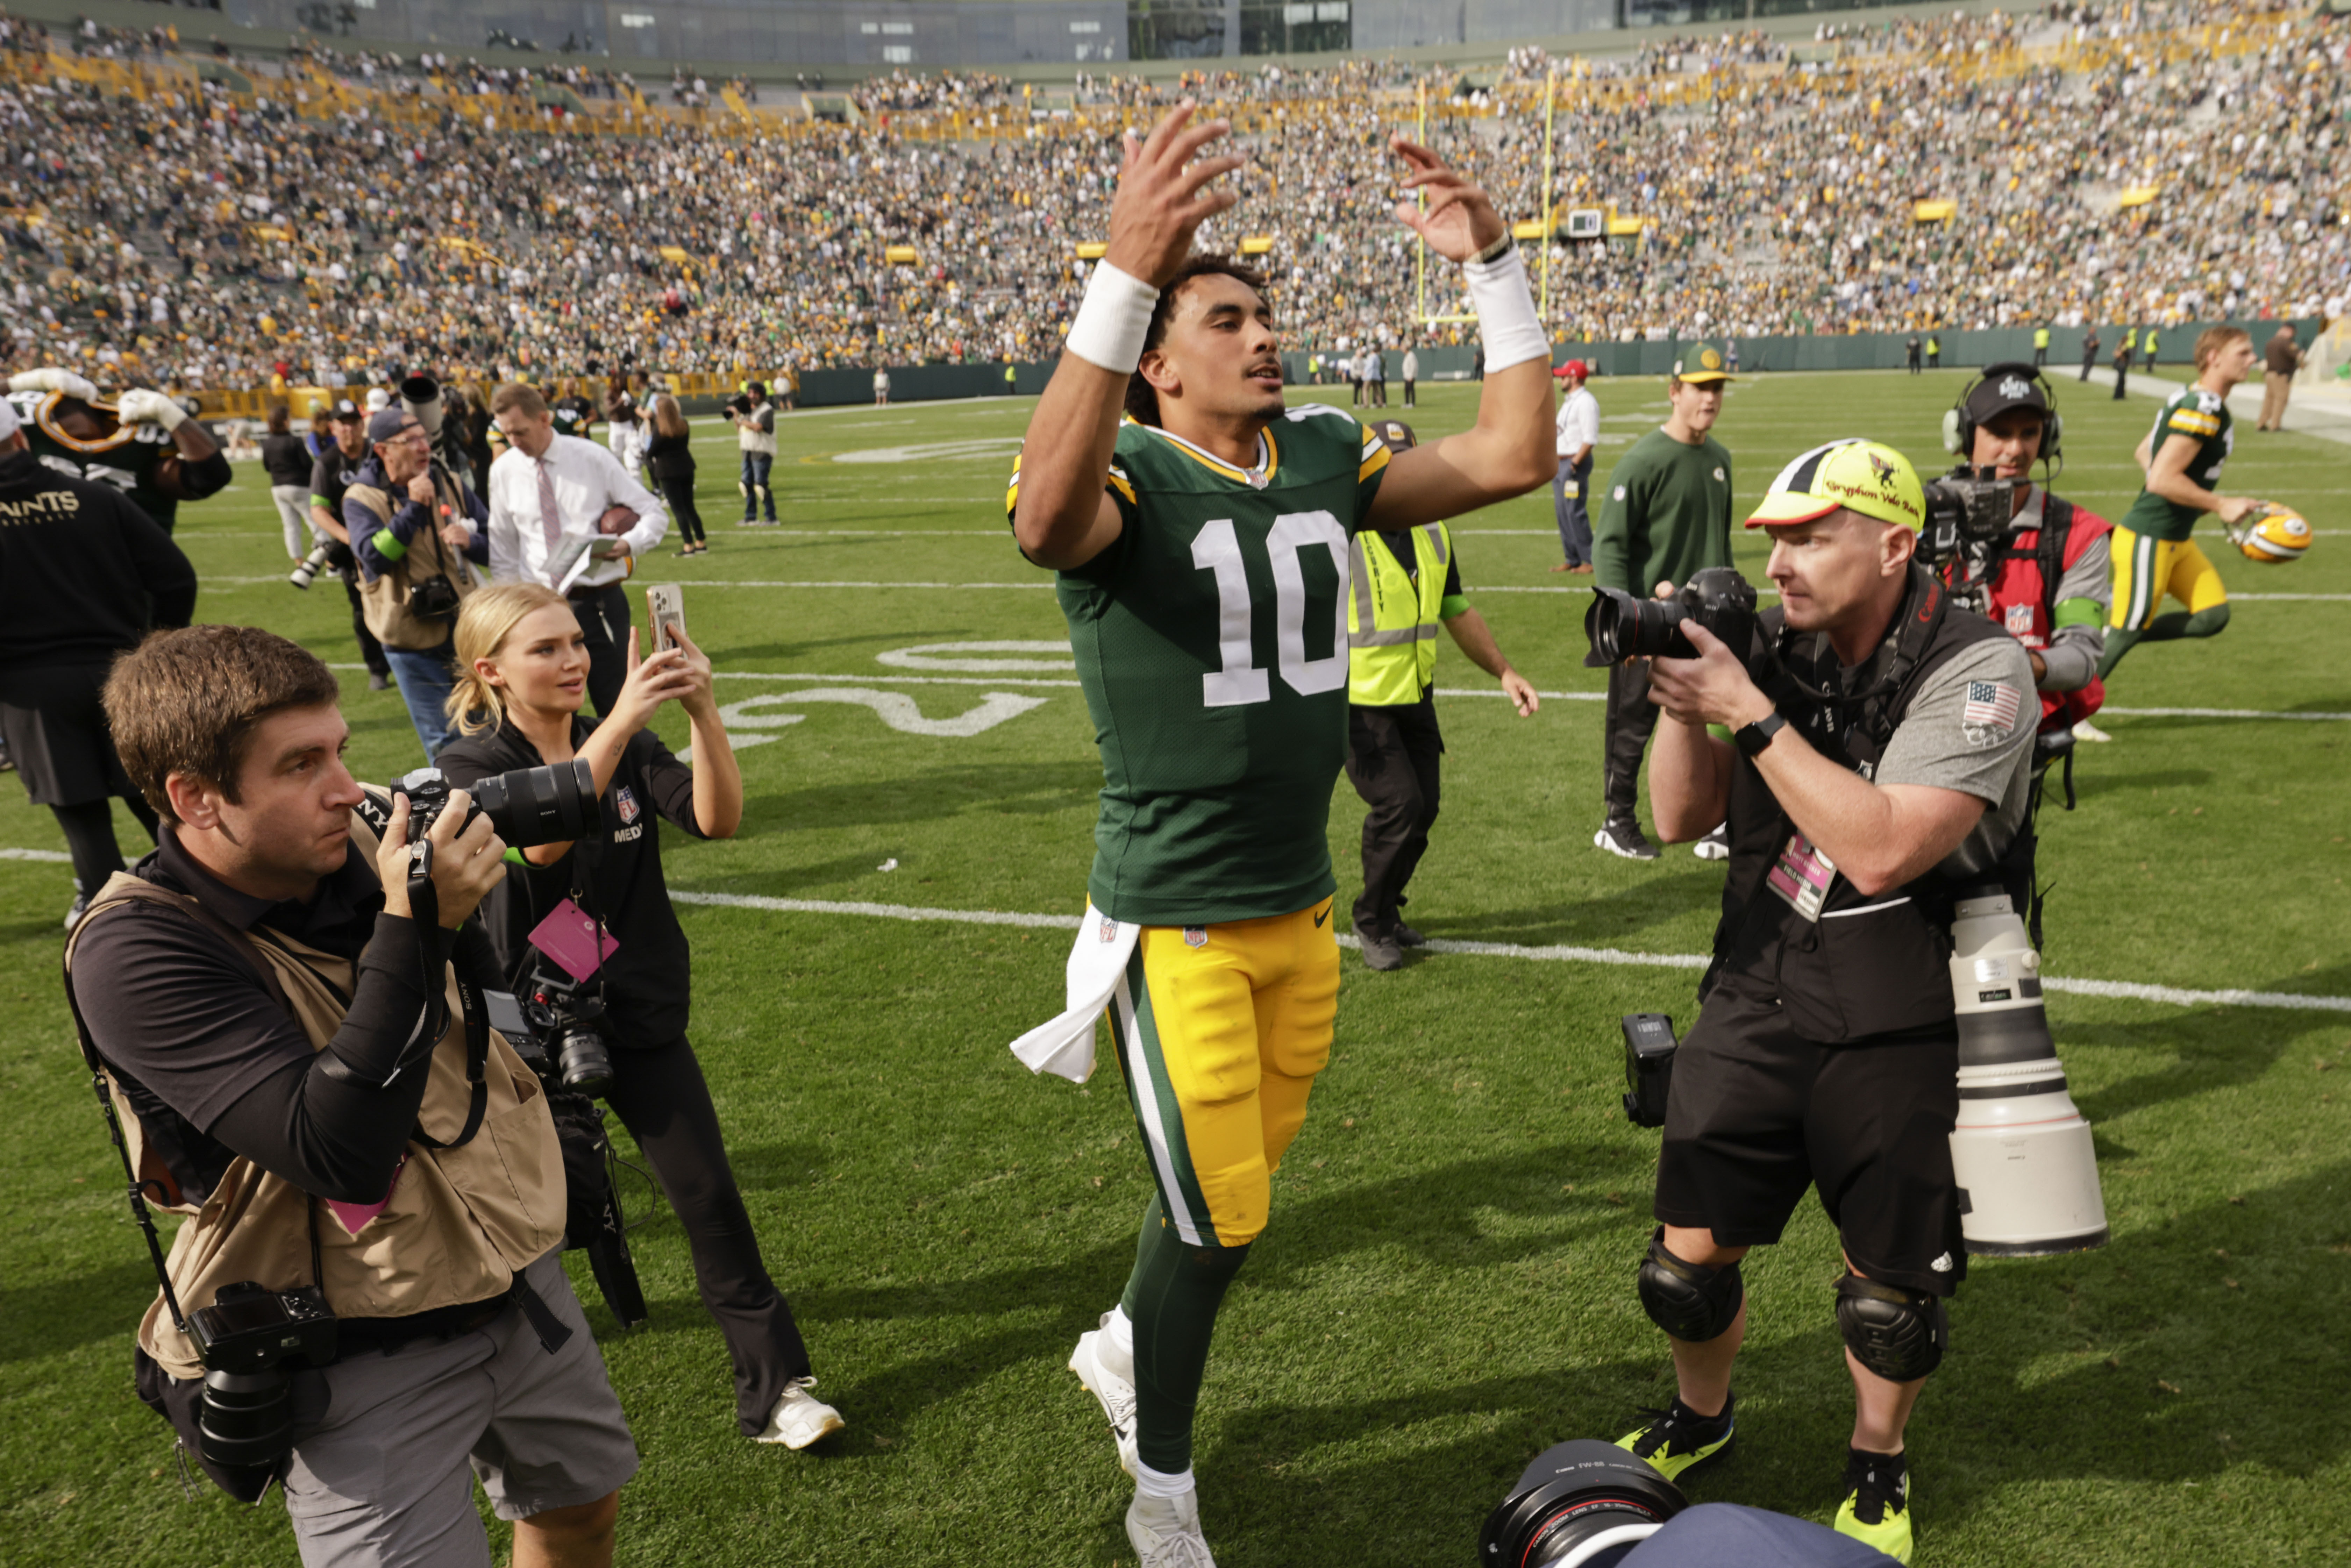 Continued belief leads to Packers comeback win in Love's first Lambeau start